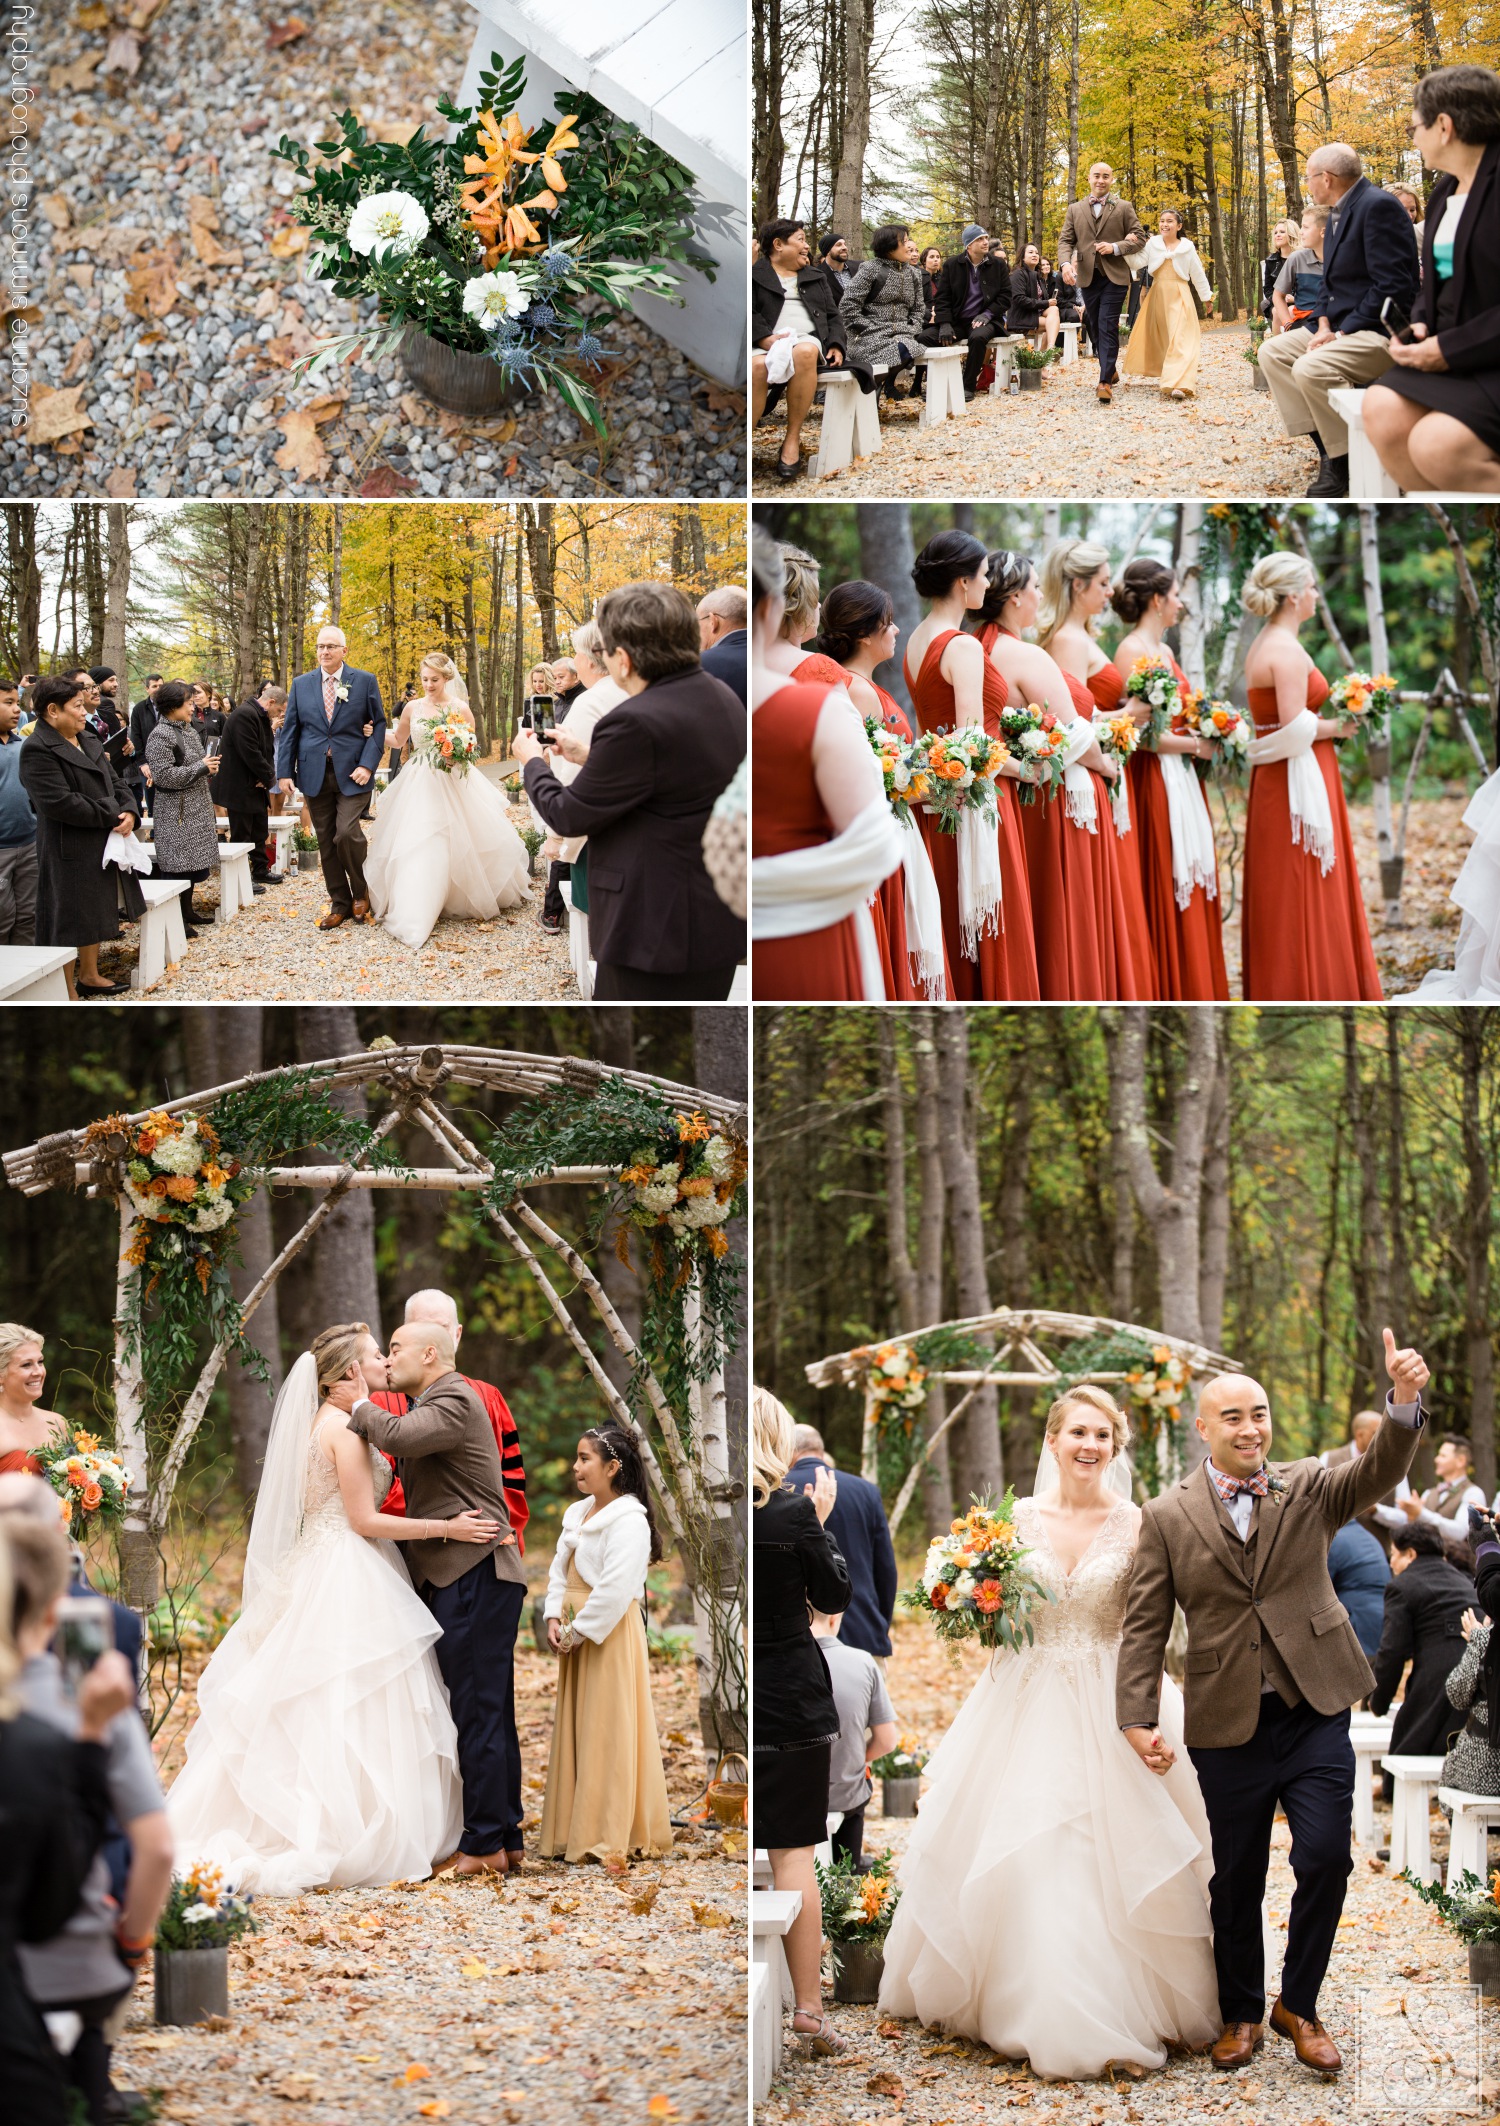 Woodland ceremony at The Barn at Flanagan Farm in Buxton, Maine